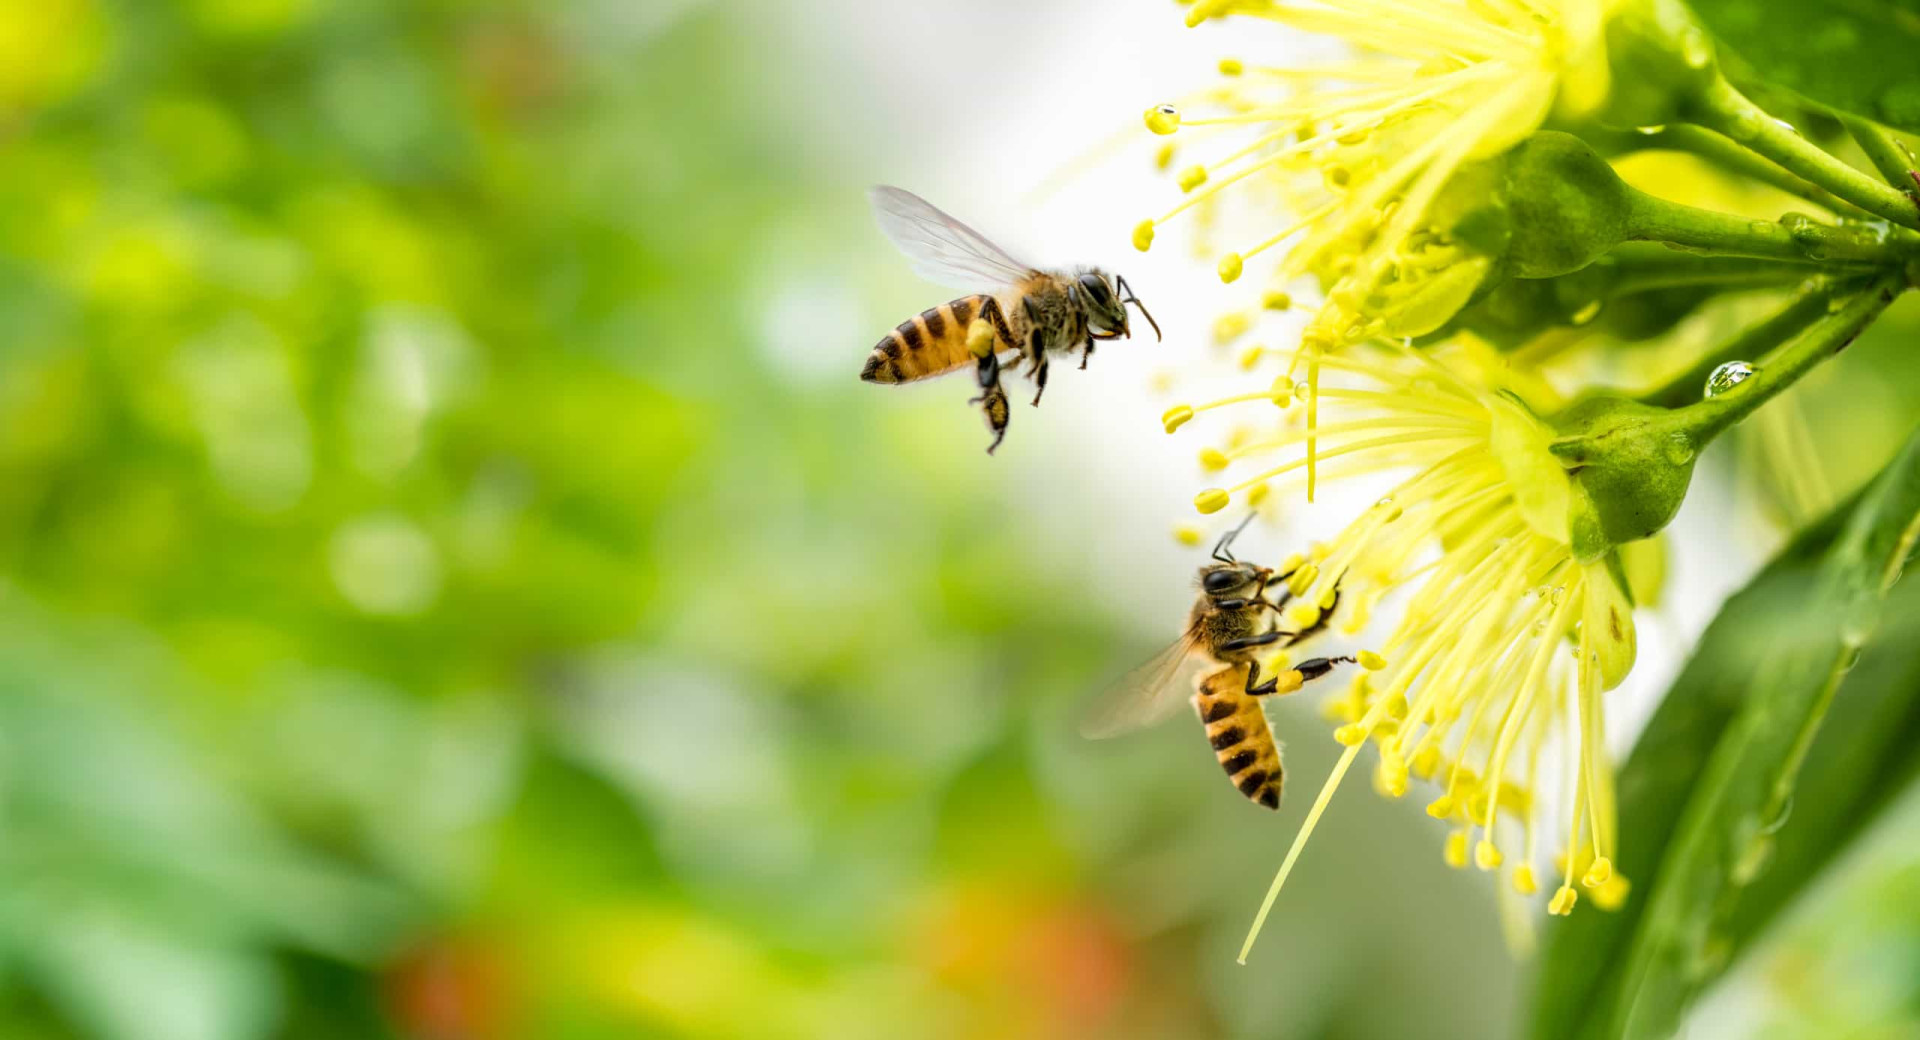 <p>Wild pollinators (native bees, leaf cutter bees, or mason bees) are important because many vegetables, including squash, cucumbers, and pumpkins, require pollinators to produce fruit. Make sure you have flowers in your garden in all seasons to attract them.</p><p>You may also like:<a href="https://www.starsinsider.com/n/380446?utm_source=msn.com&utm_medium=display&utm_campaign=referral_description&utm_content=491515en-us"> Zendaya: Meet the girl taking over the world</a></p>